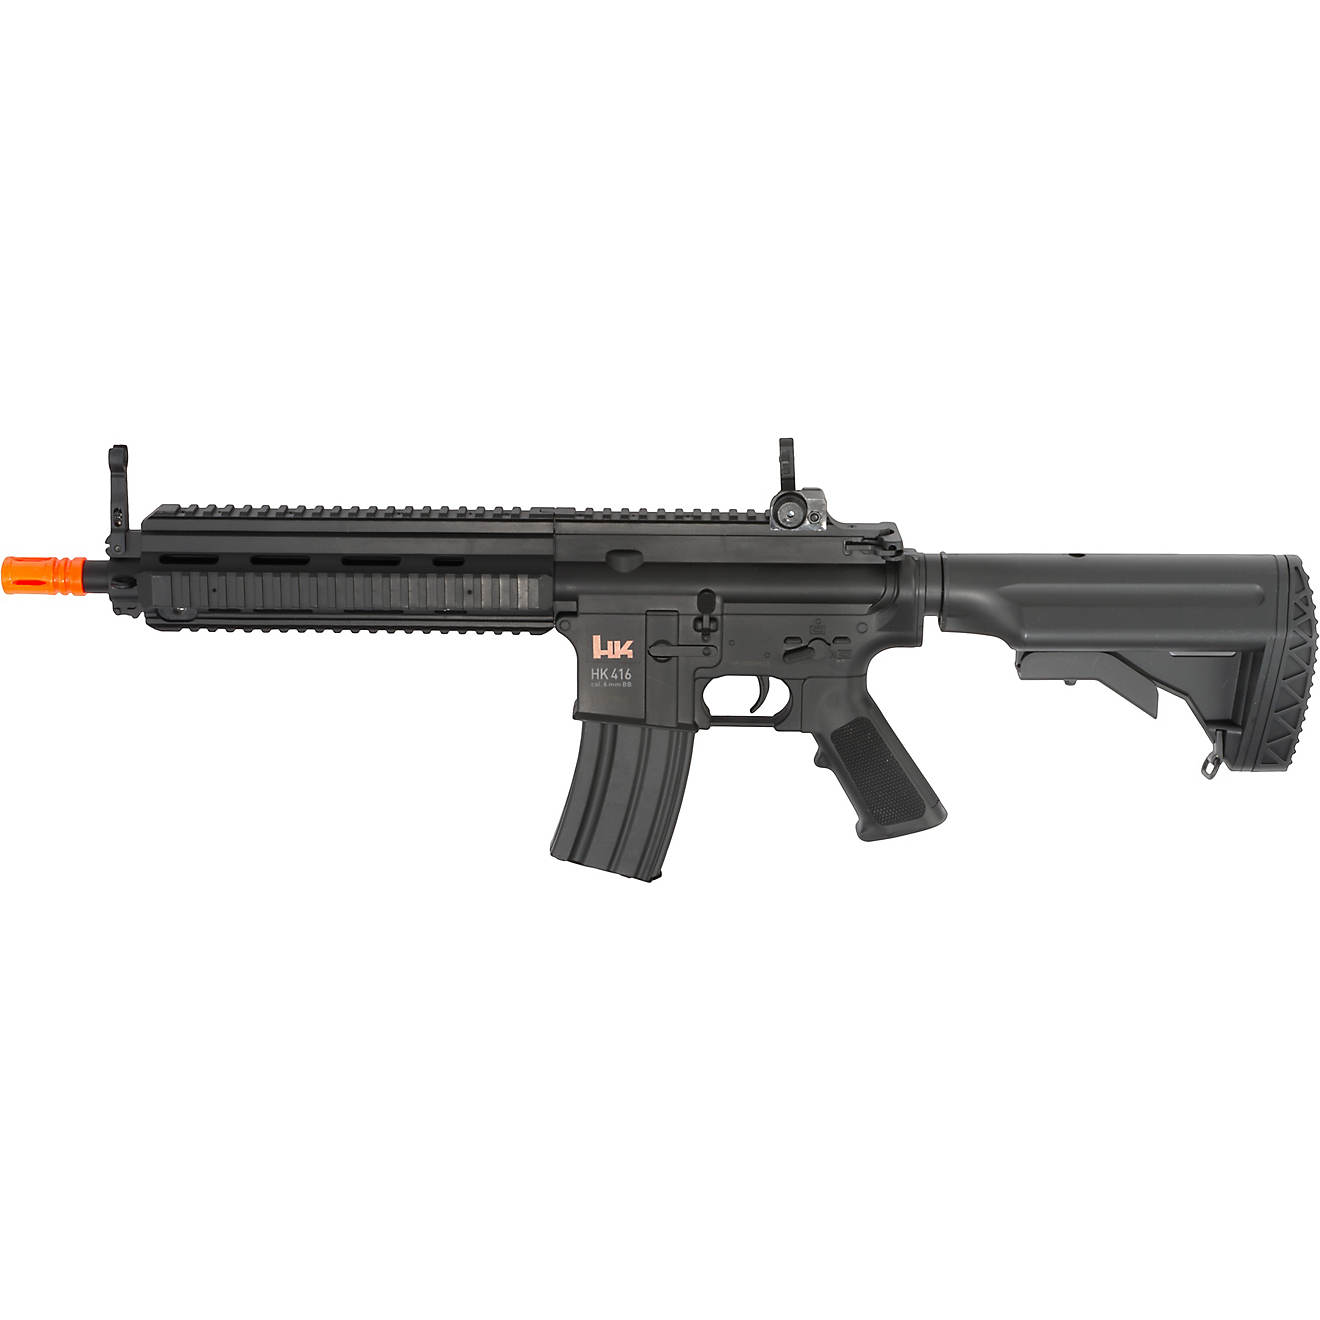 Heckler & Koch 416 6 mm Airsoft Rifle | Free Shipping at Academy